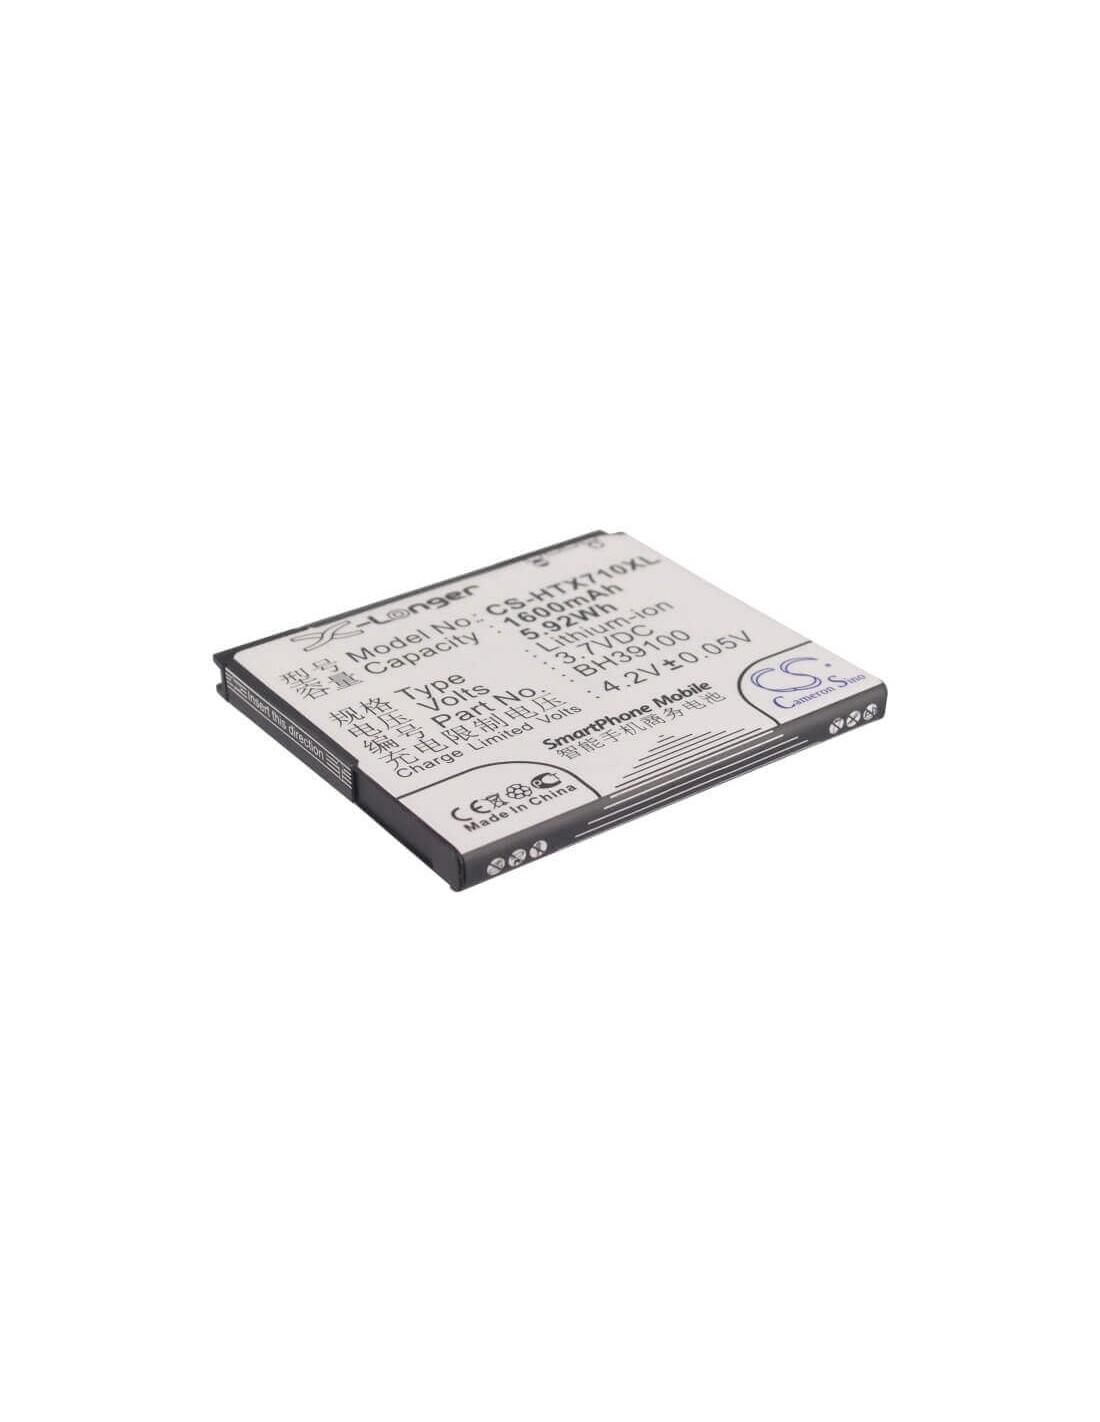 Battery for HTC C110e, G20, Holiday 3.7V, 1600mAh - 5.92Wh